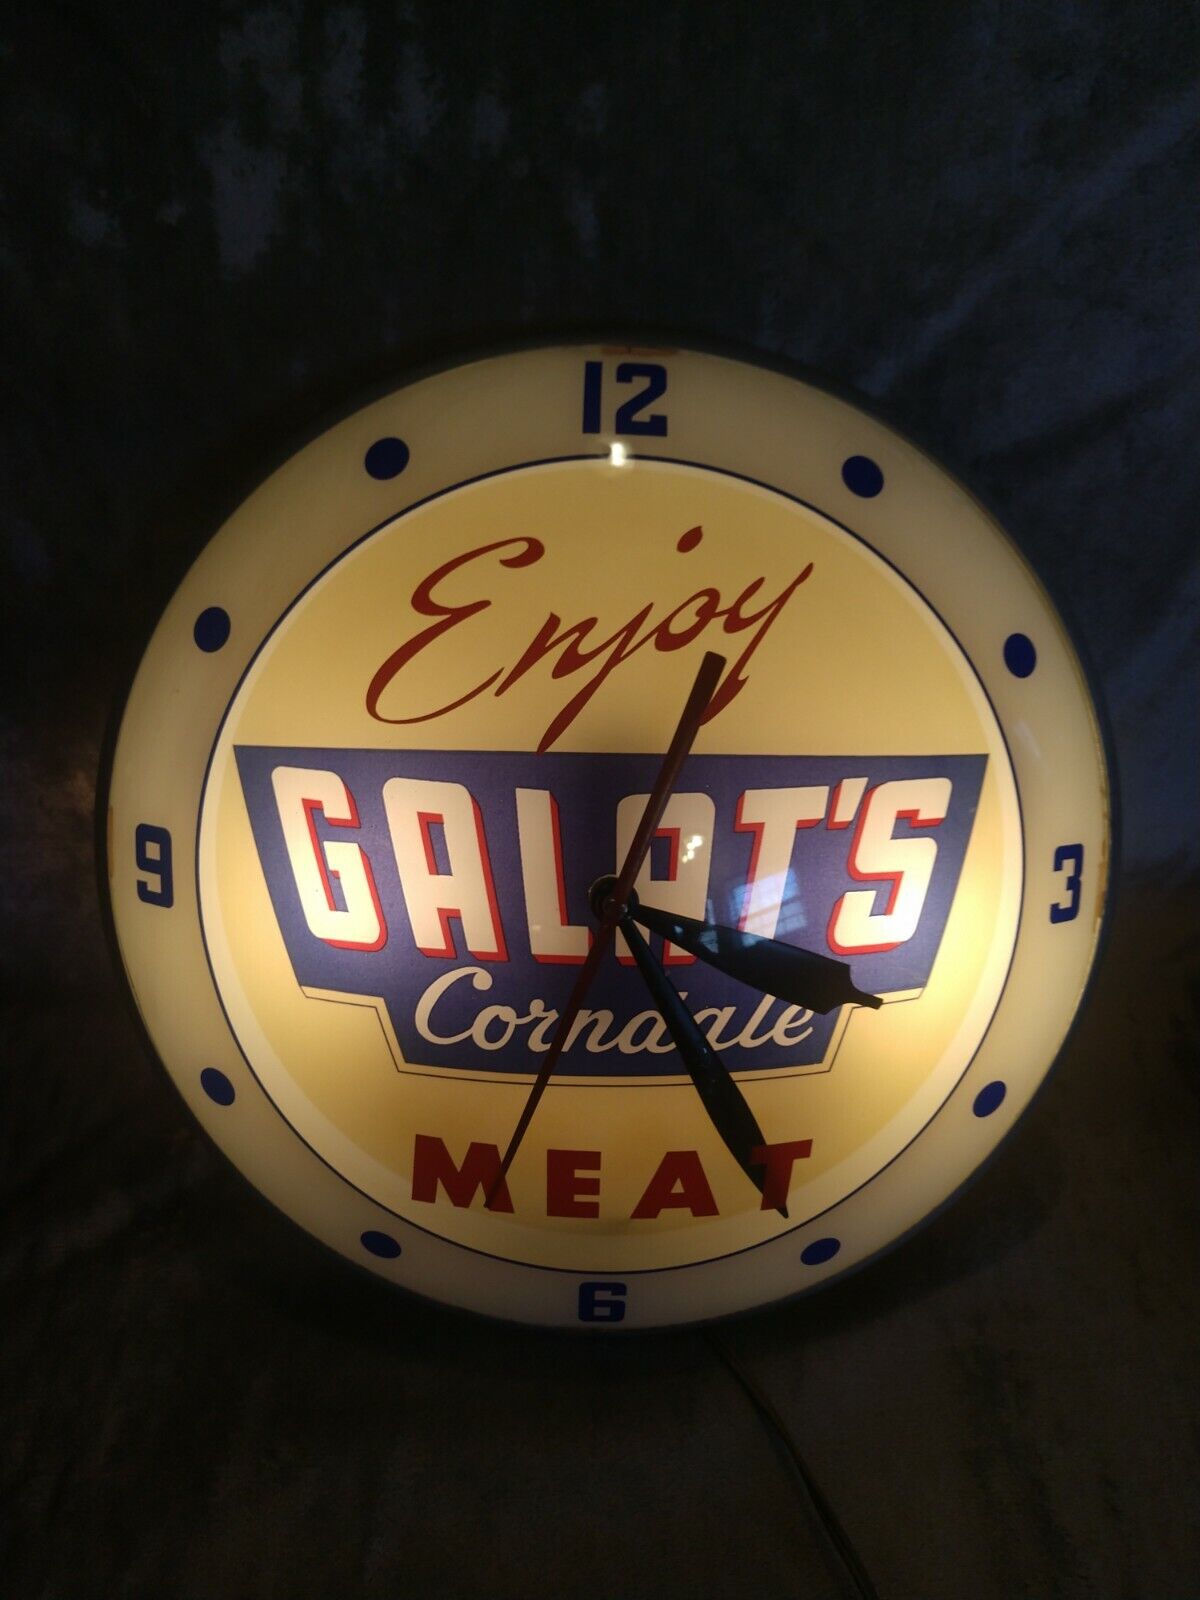 Vintage Rare Galats Corndale Meat double bubble wall clock lighted WORKS 